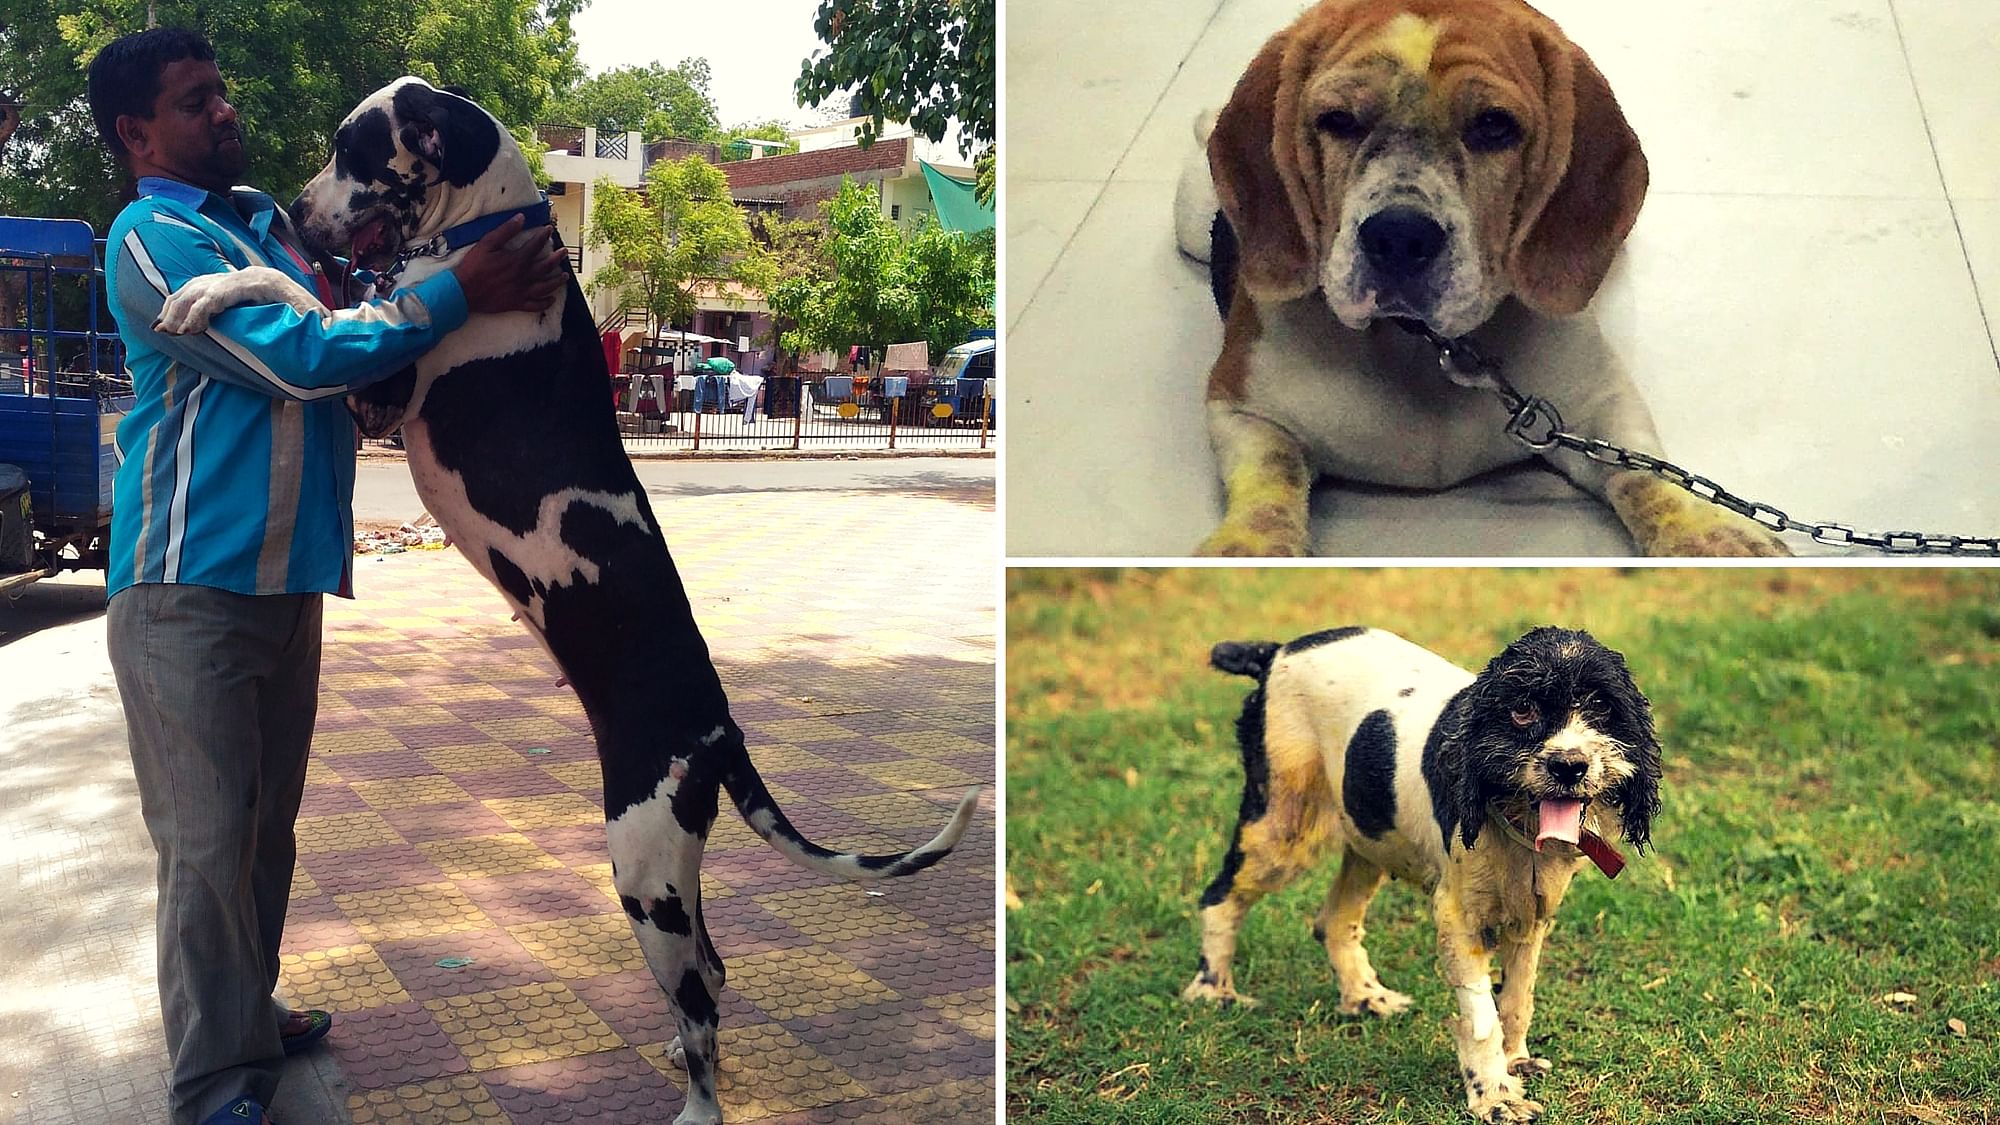 India isn’t home to these breeds and you’re only piling on the atrocities against animals. (Photo Courtesy: Friendicoes)